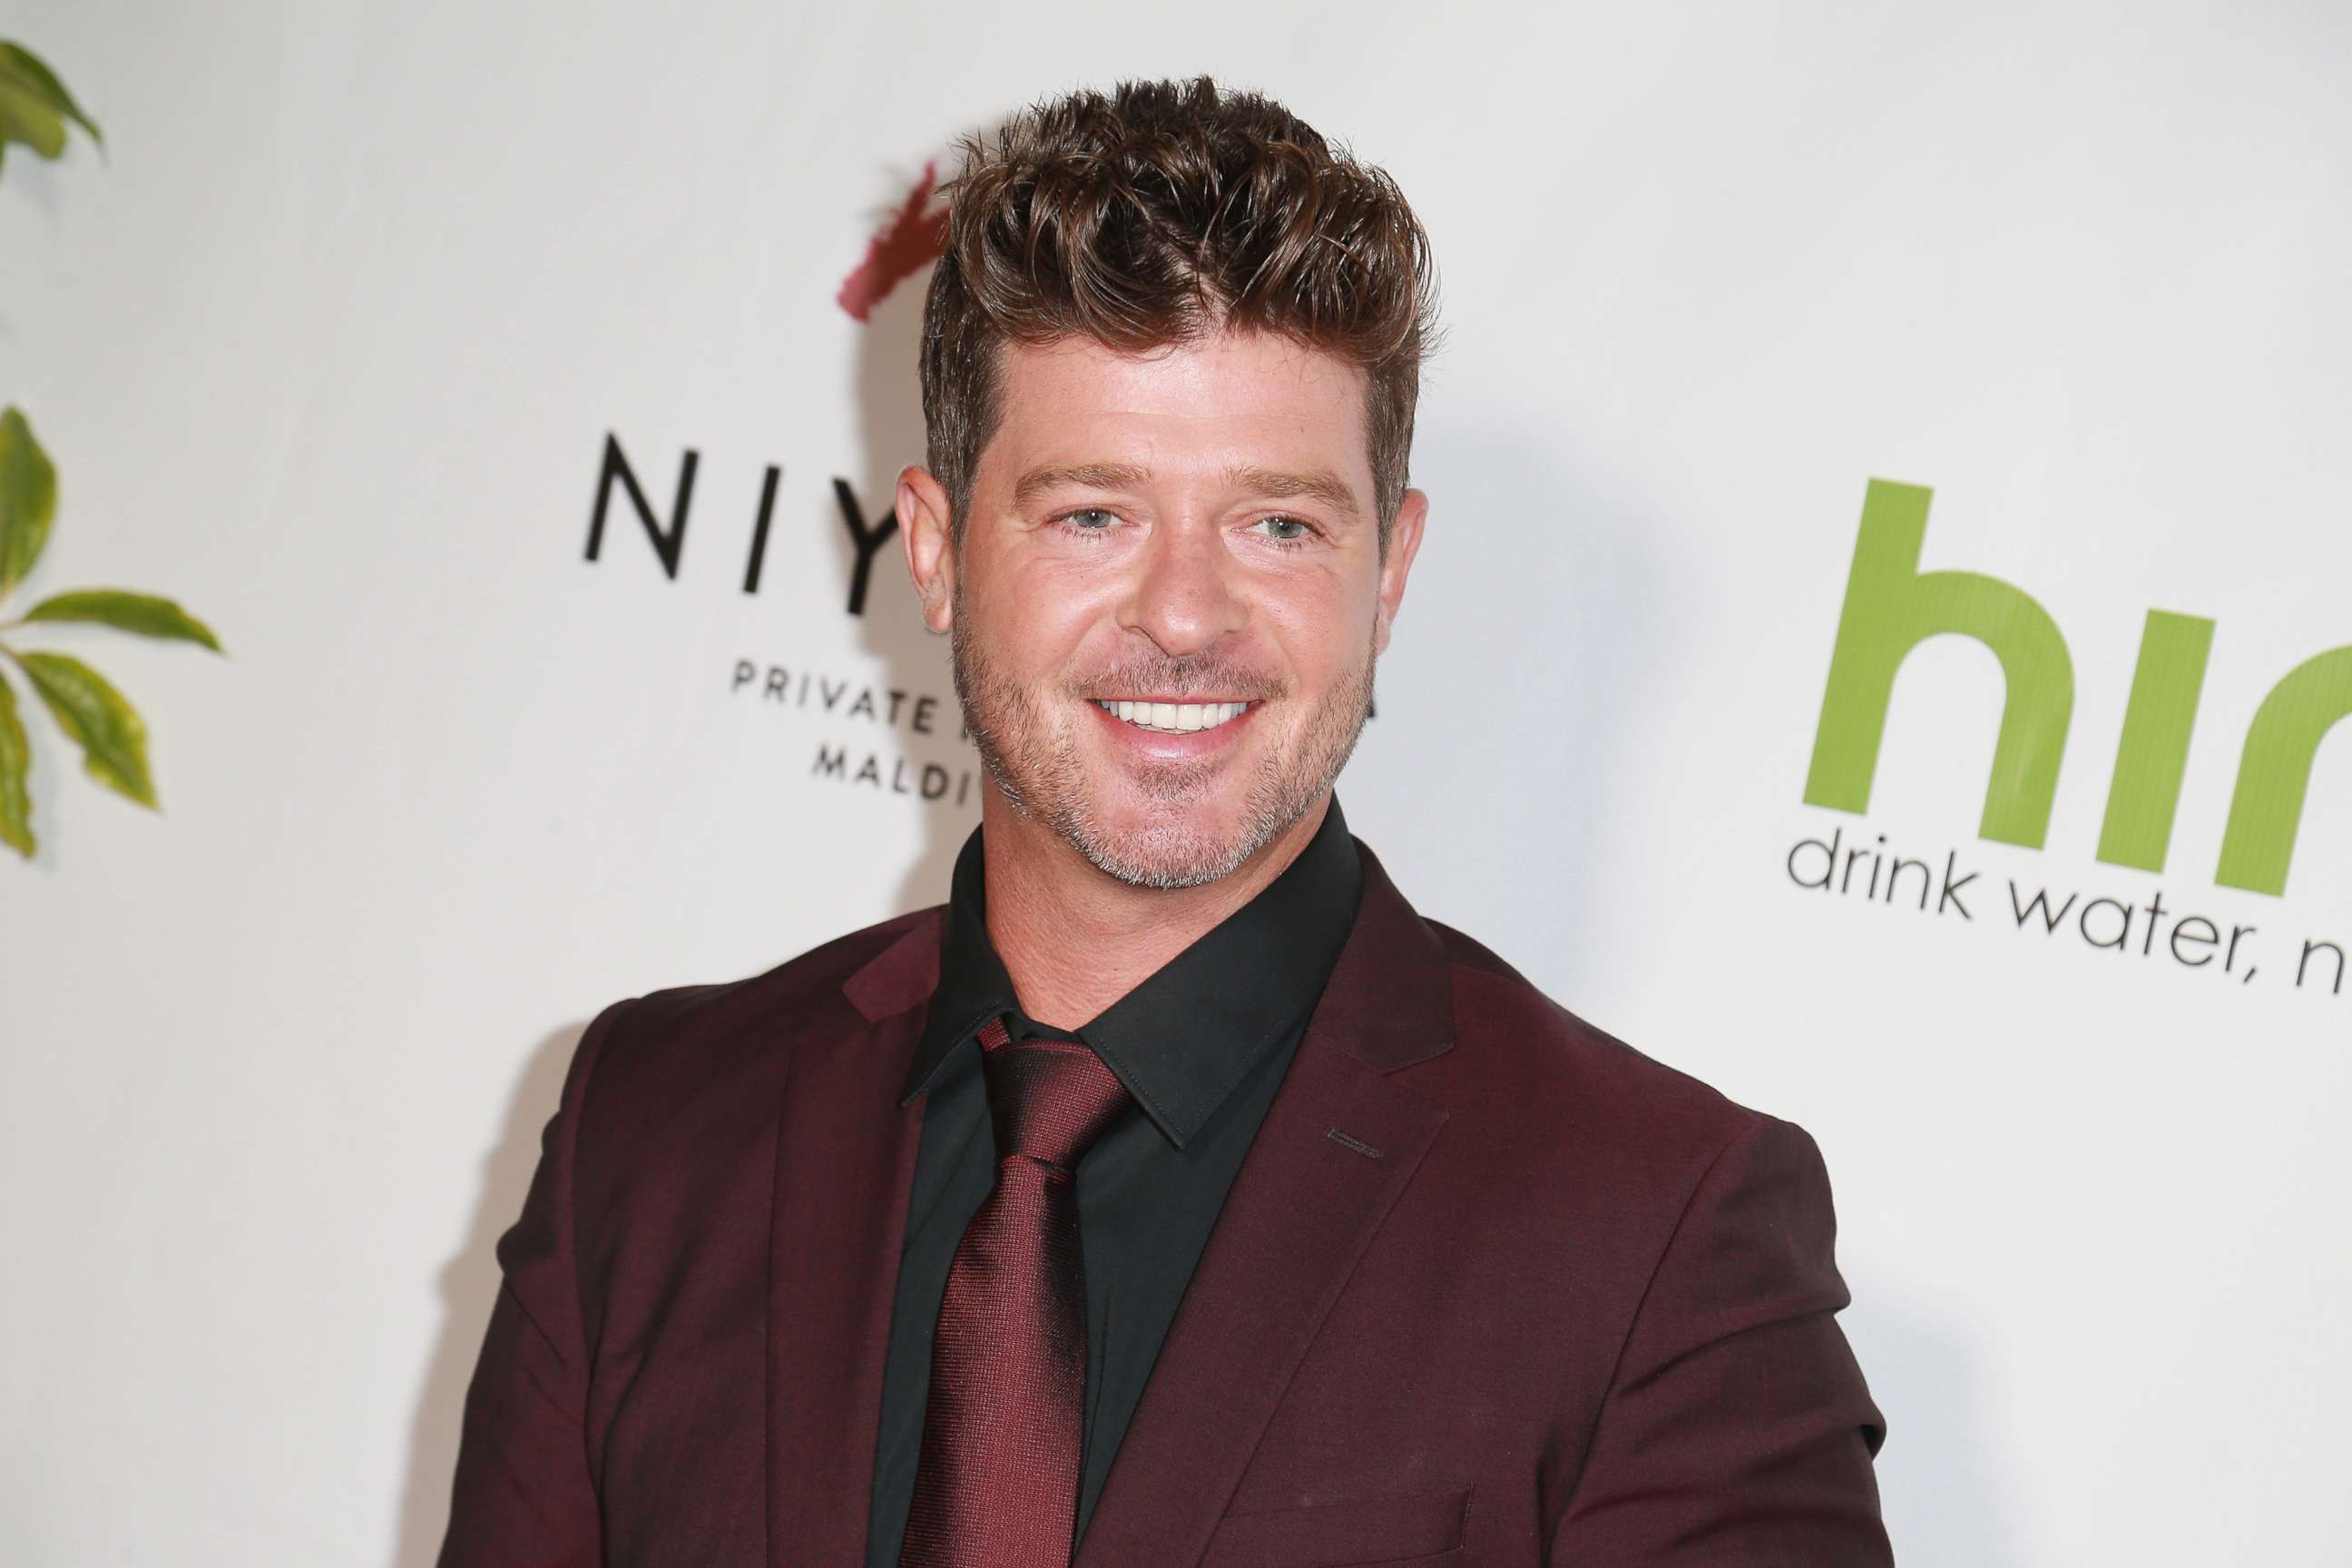 PHOTO: Robin Thicke attends the Face Forward 8th Annual Gala at Taglyan Cultural Complex, Sept. 23, 2017 in Hollywood, Calif.